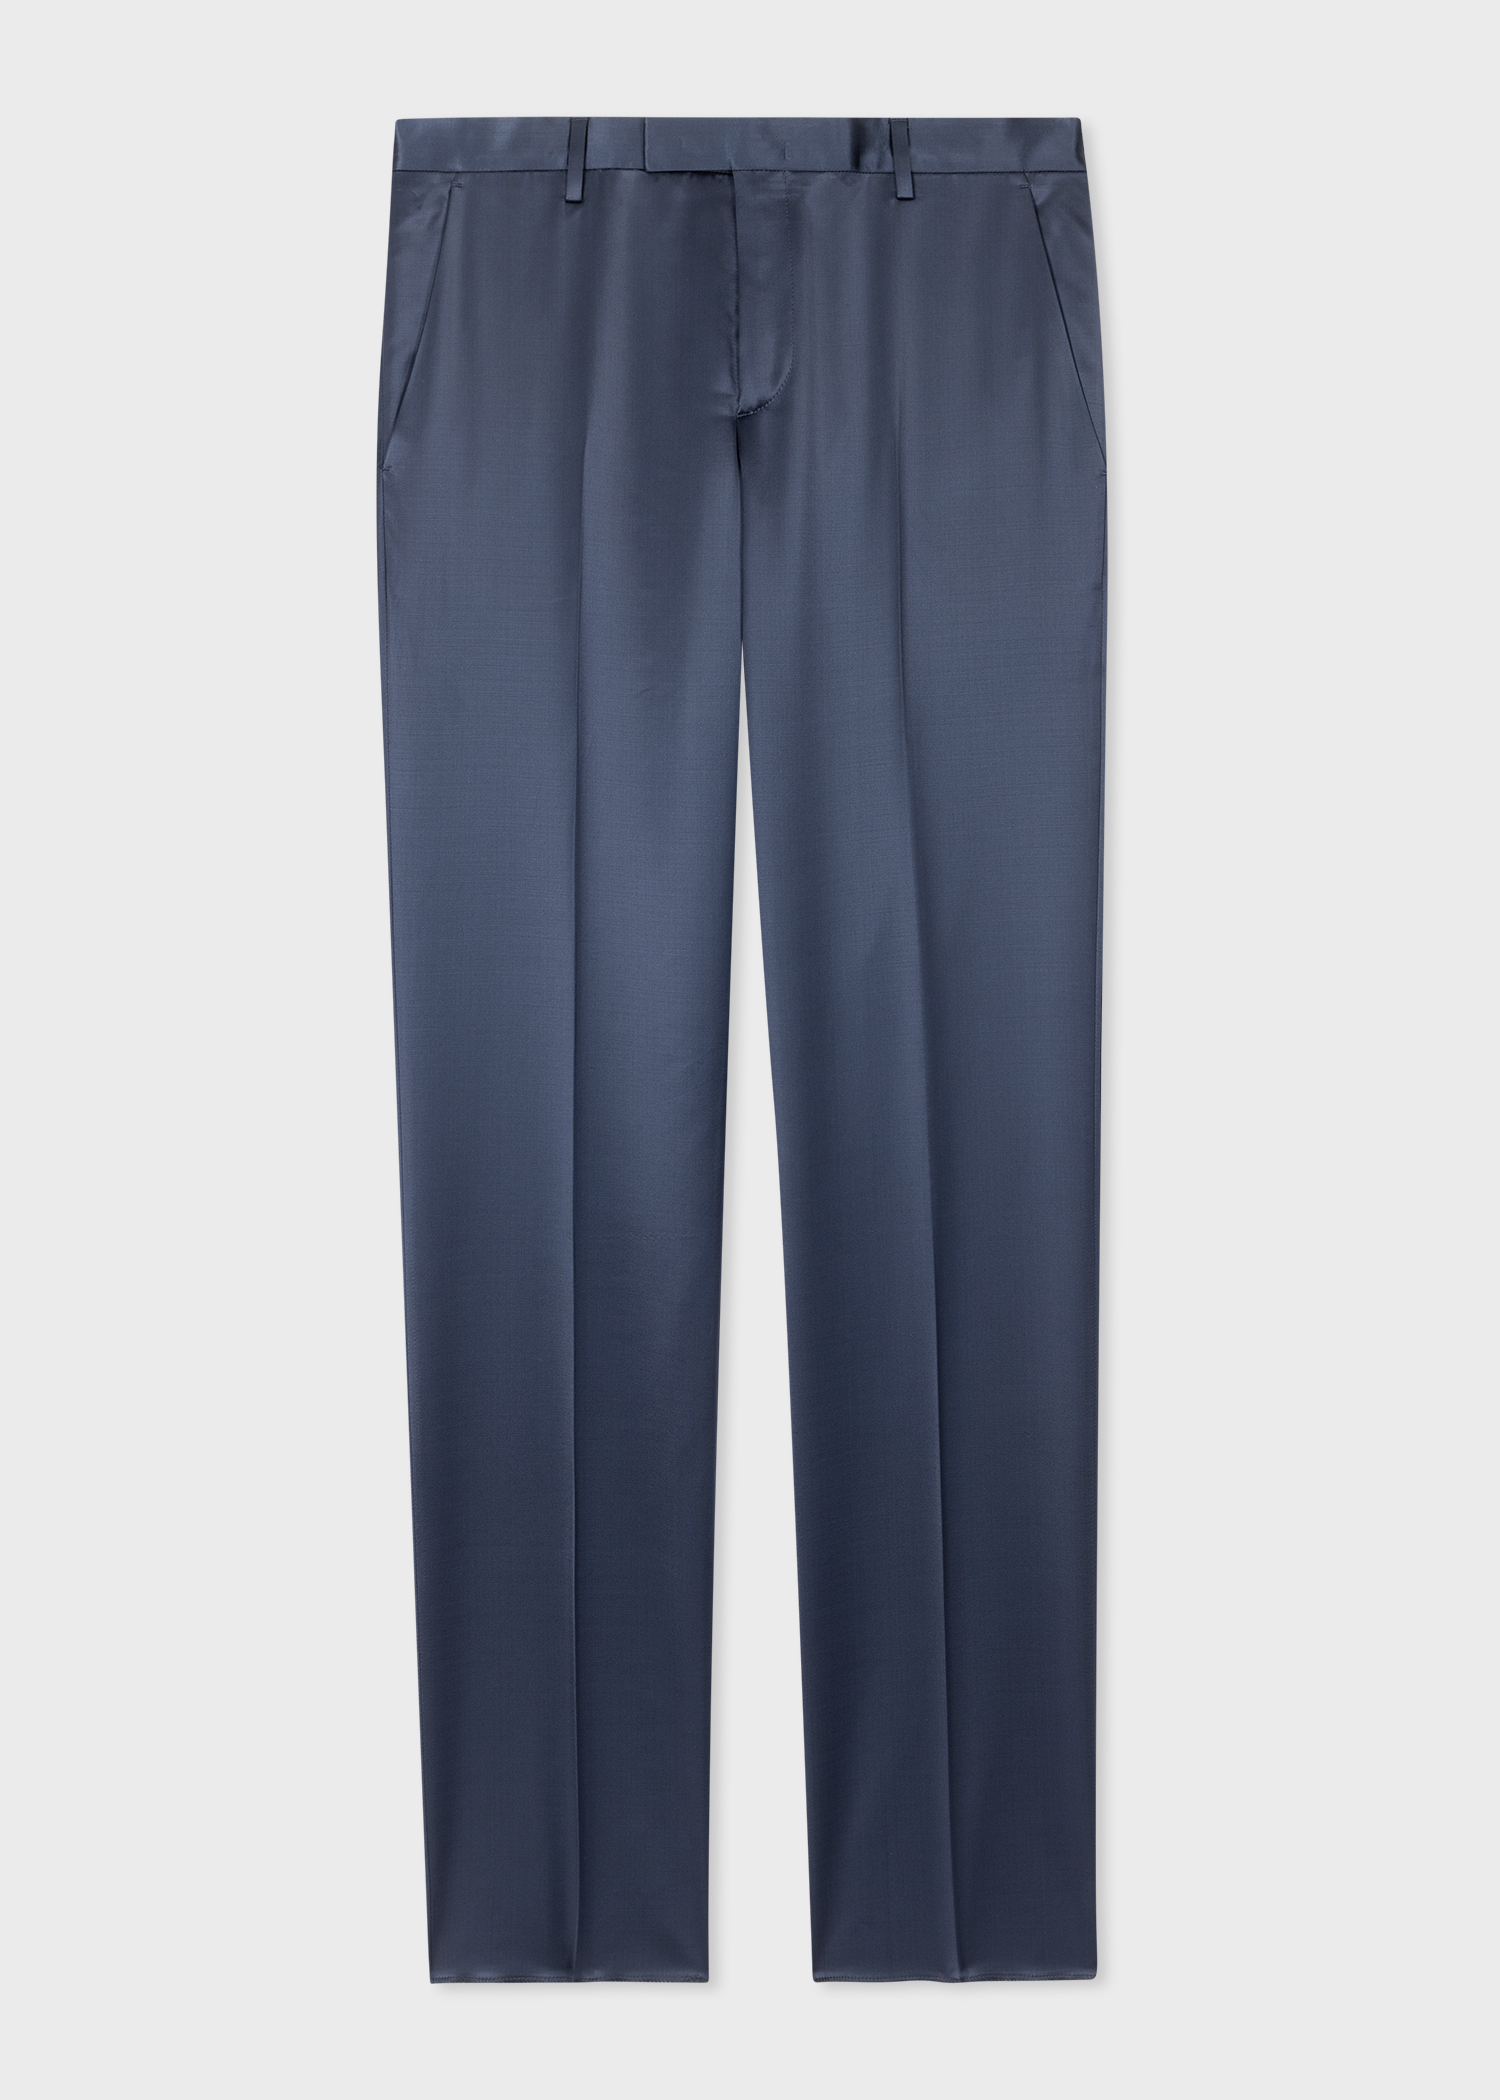 & Other Stories Tailored Straight-Leg Trousers | King's Cross